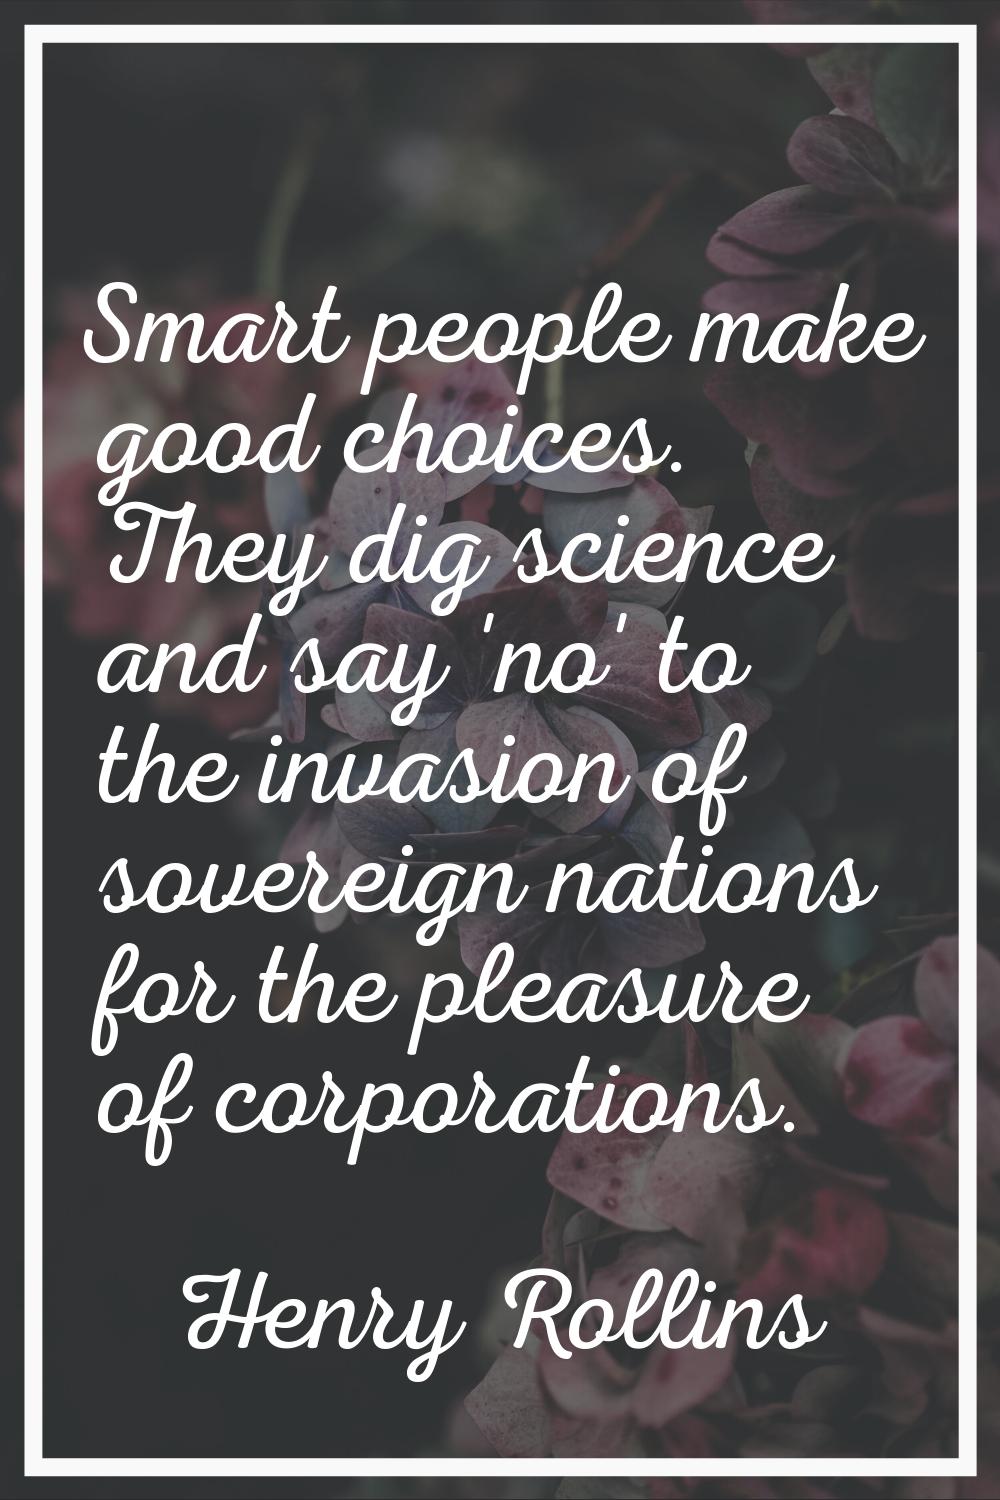 Smart people make good choices. They dig science and say 'no' to the invasion of sovereign nations 